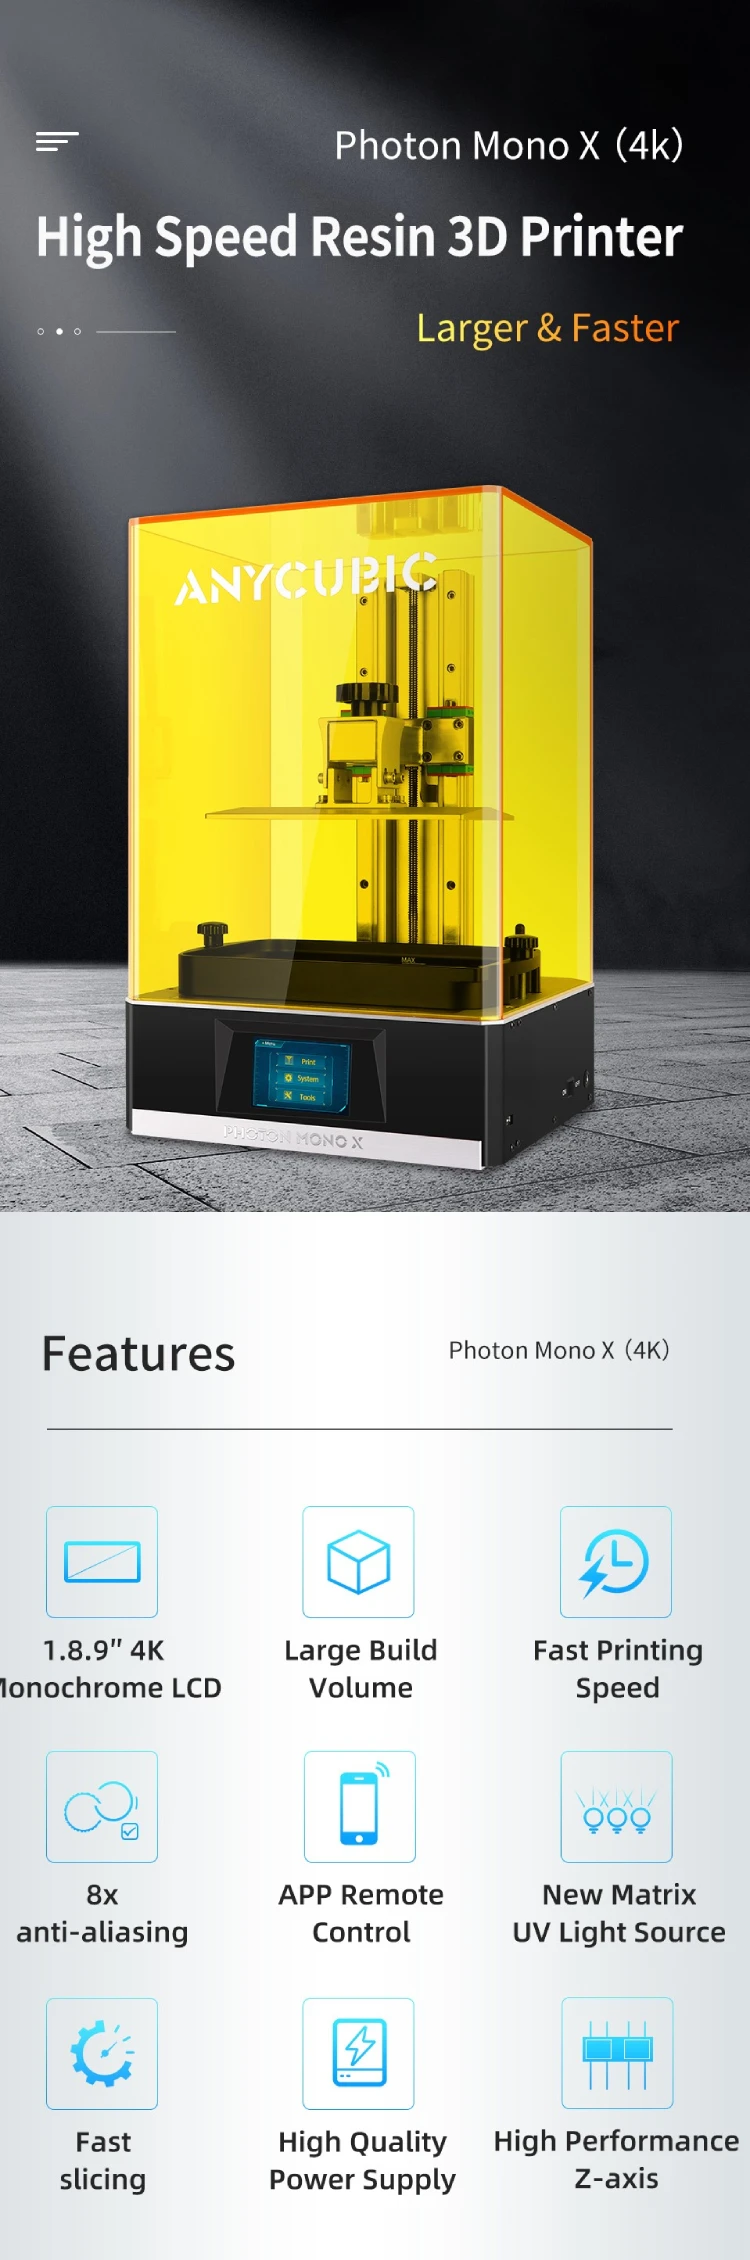 New Product Anycubic Photon Mono X 4k Lcd Resin 3d Printer Remote Control And Large Build Volume 192 L 1 W 245 H Mm Buy Impressora 3d 3d Printer Resin Large 3d Printer Product On Alibaba Com